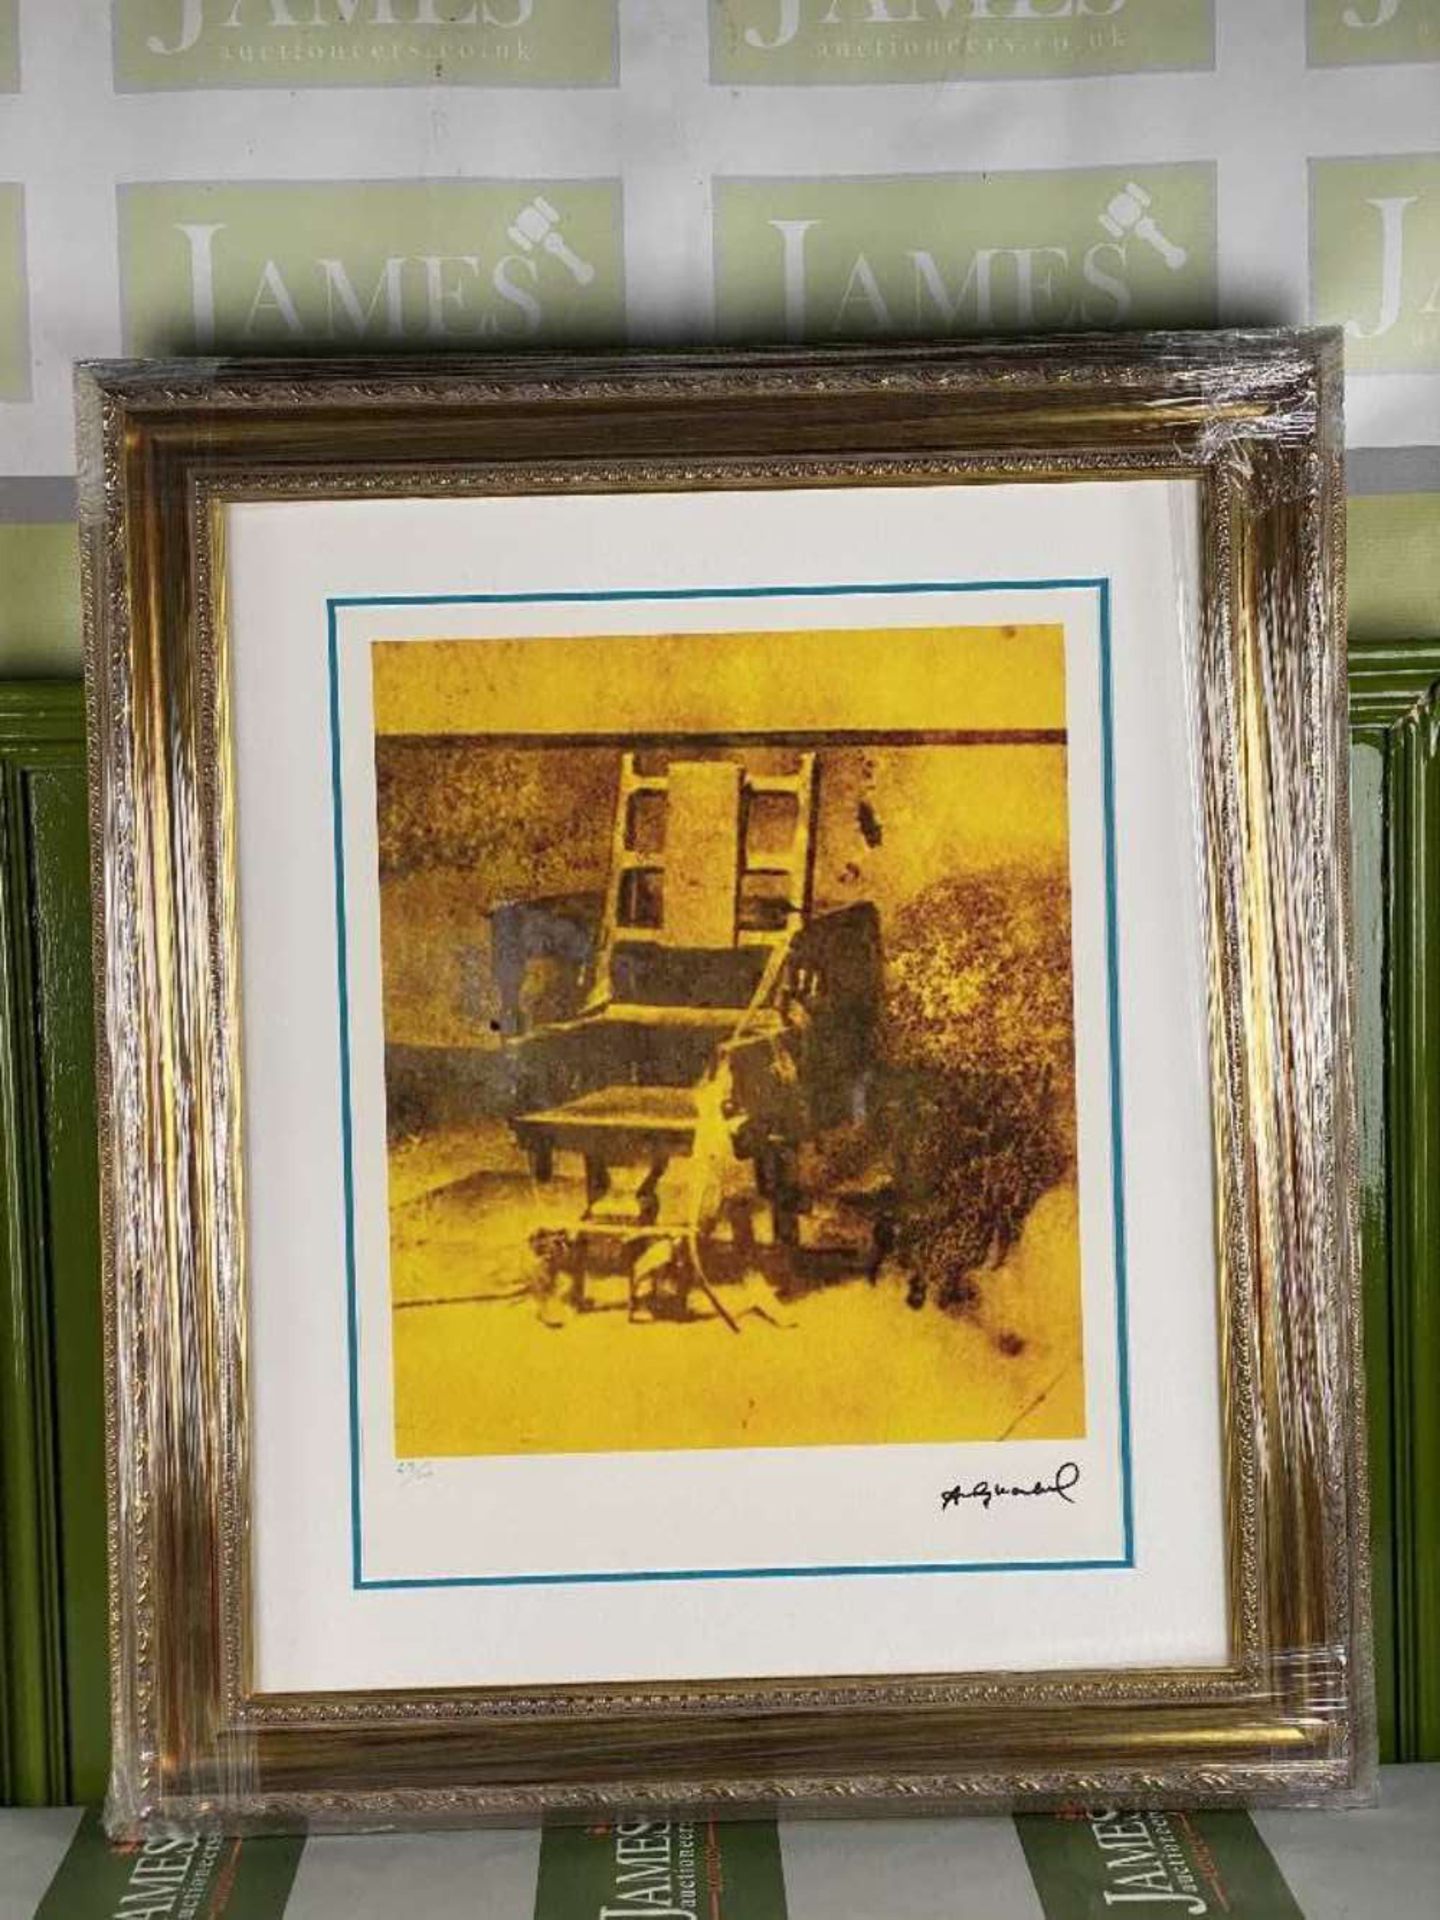 Andy Warhol (1928-1987) “The Chair” Ltd Edition Lithograph - Image 7 of 7